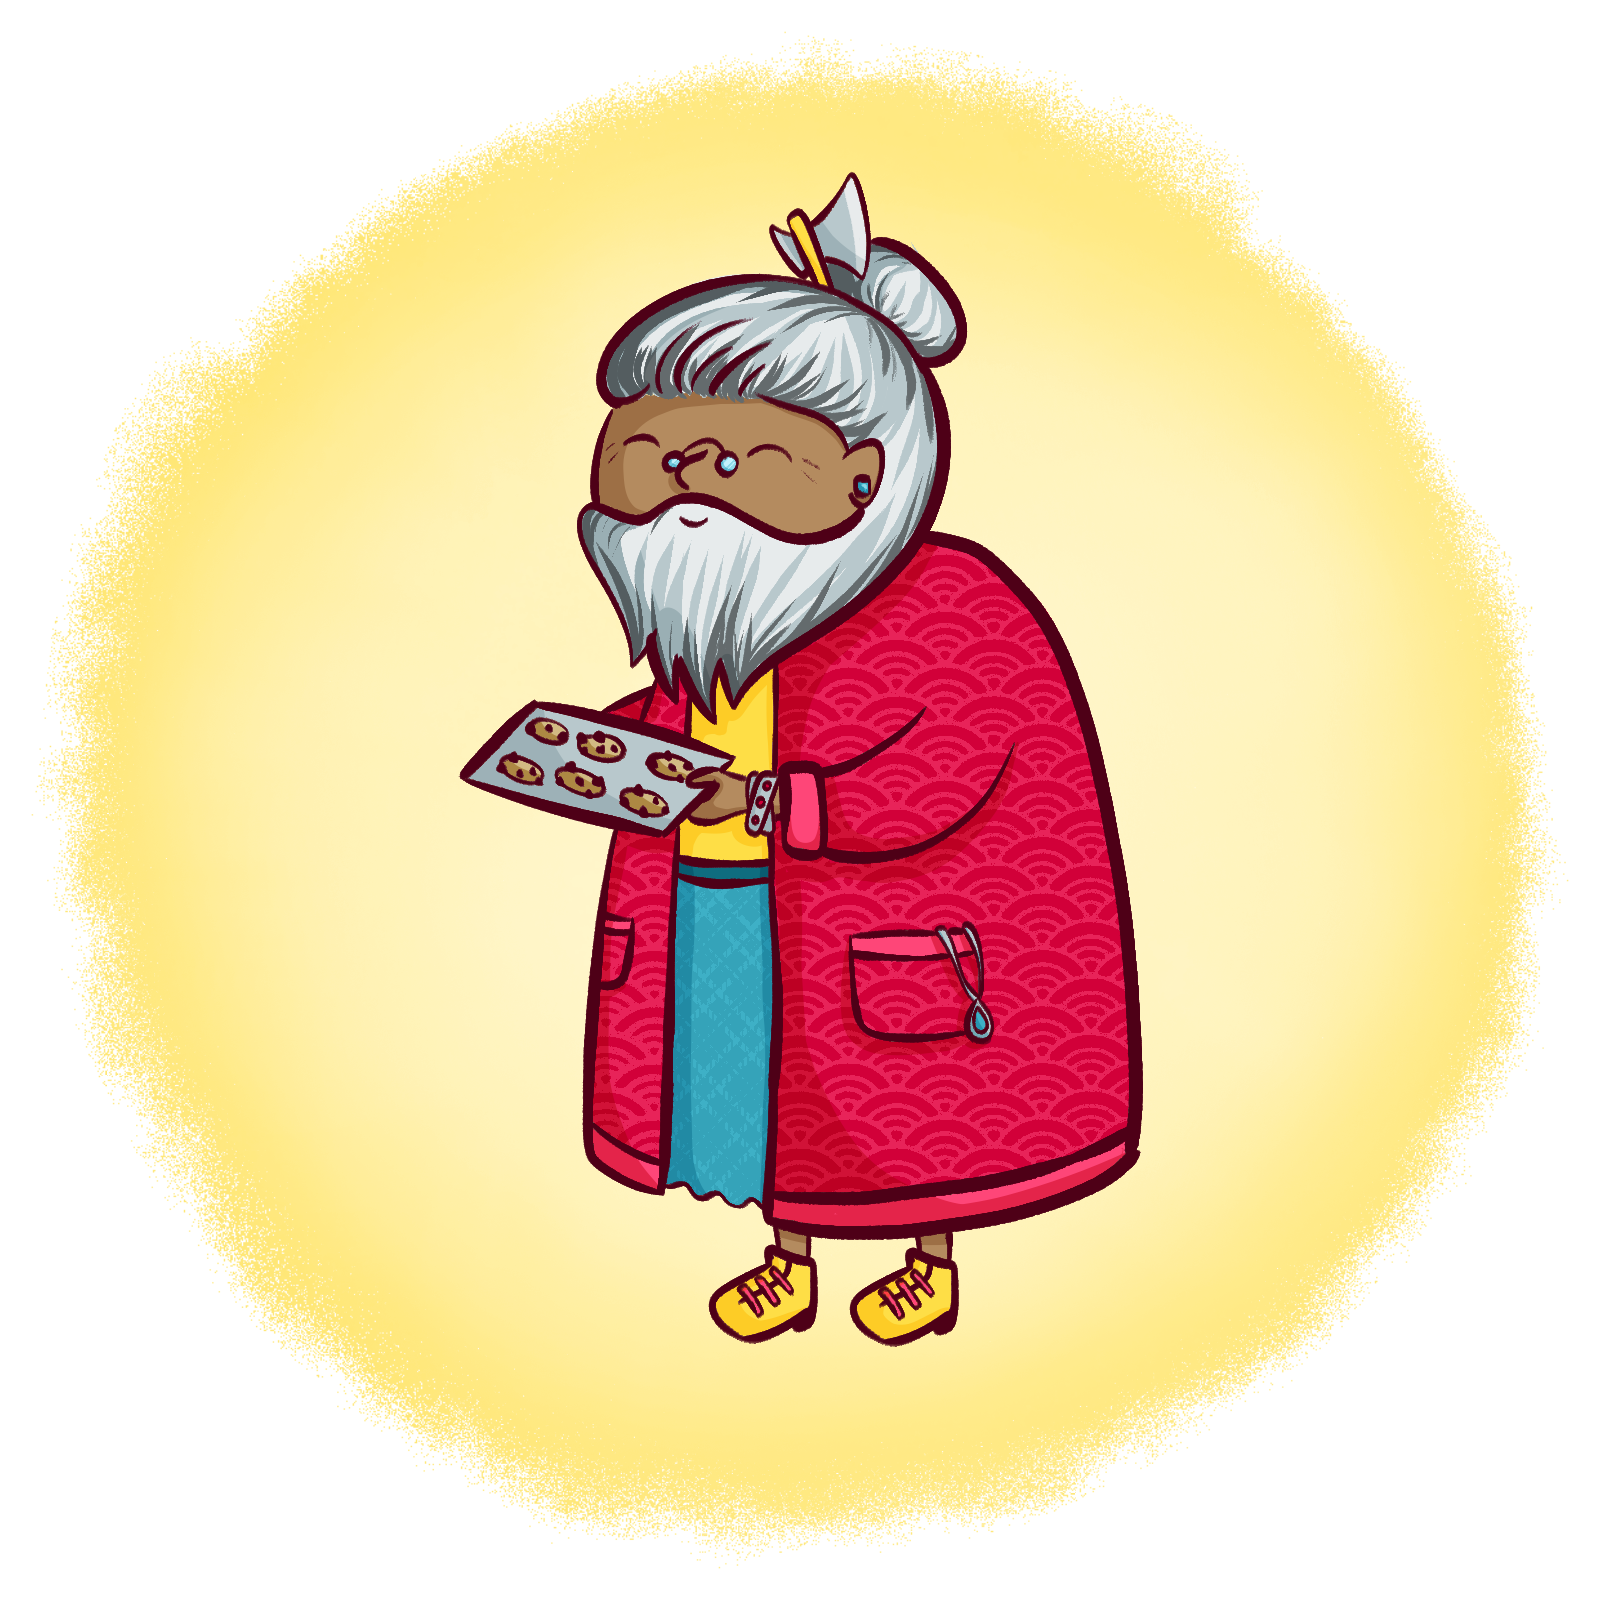 Granny Mardred drawn by Wing-Yee